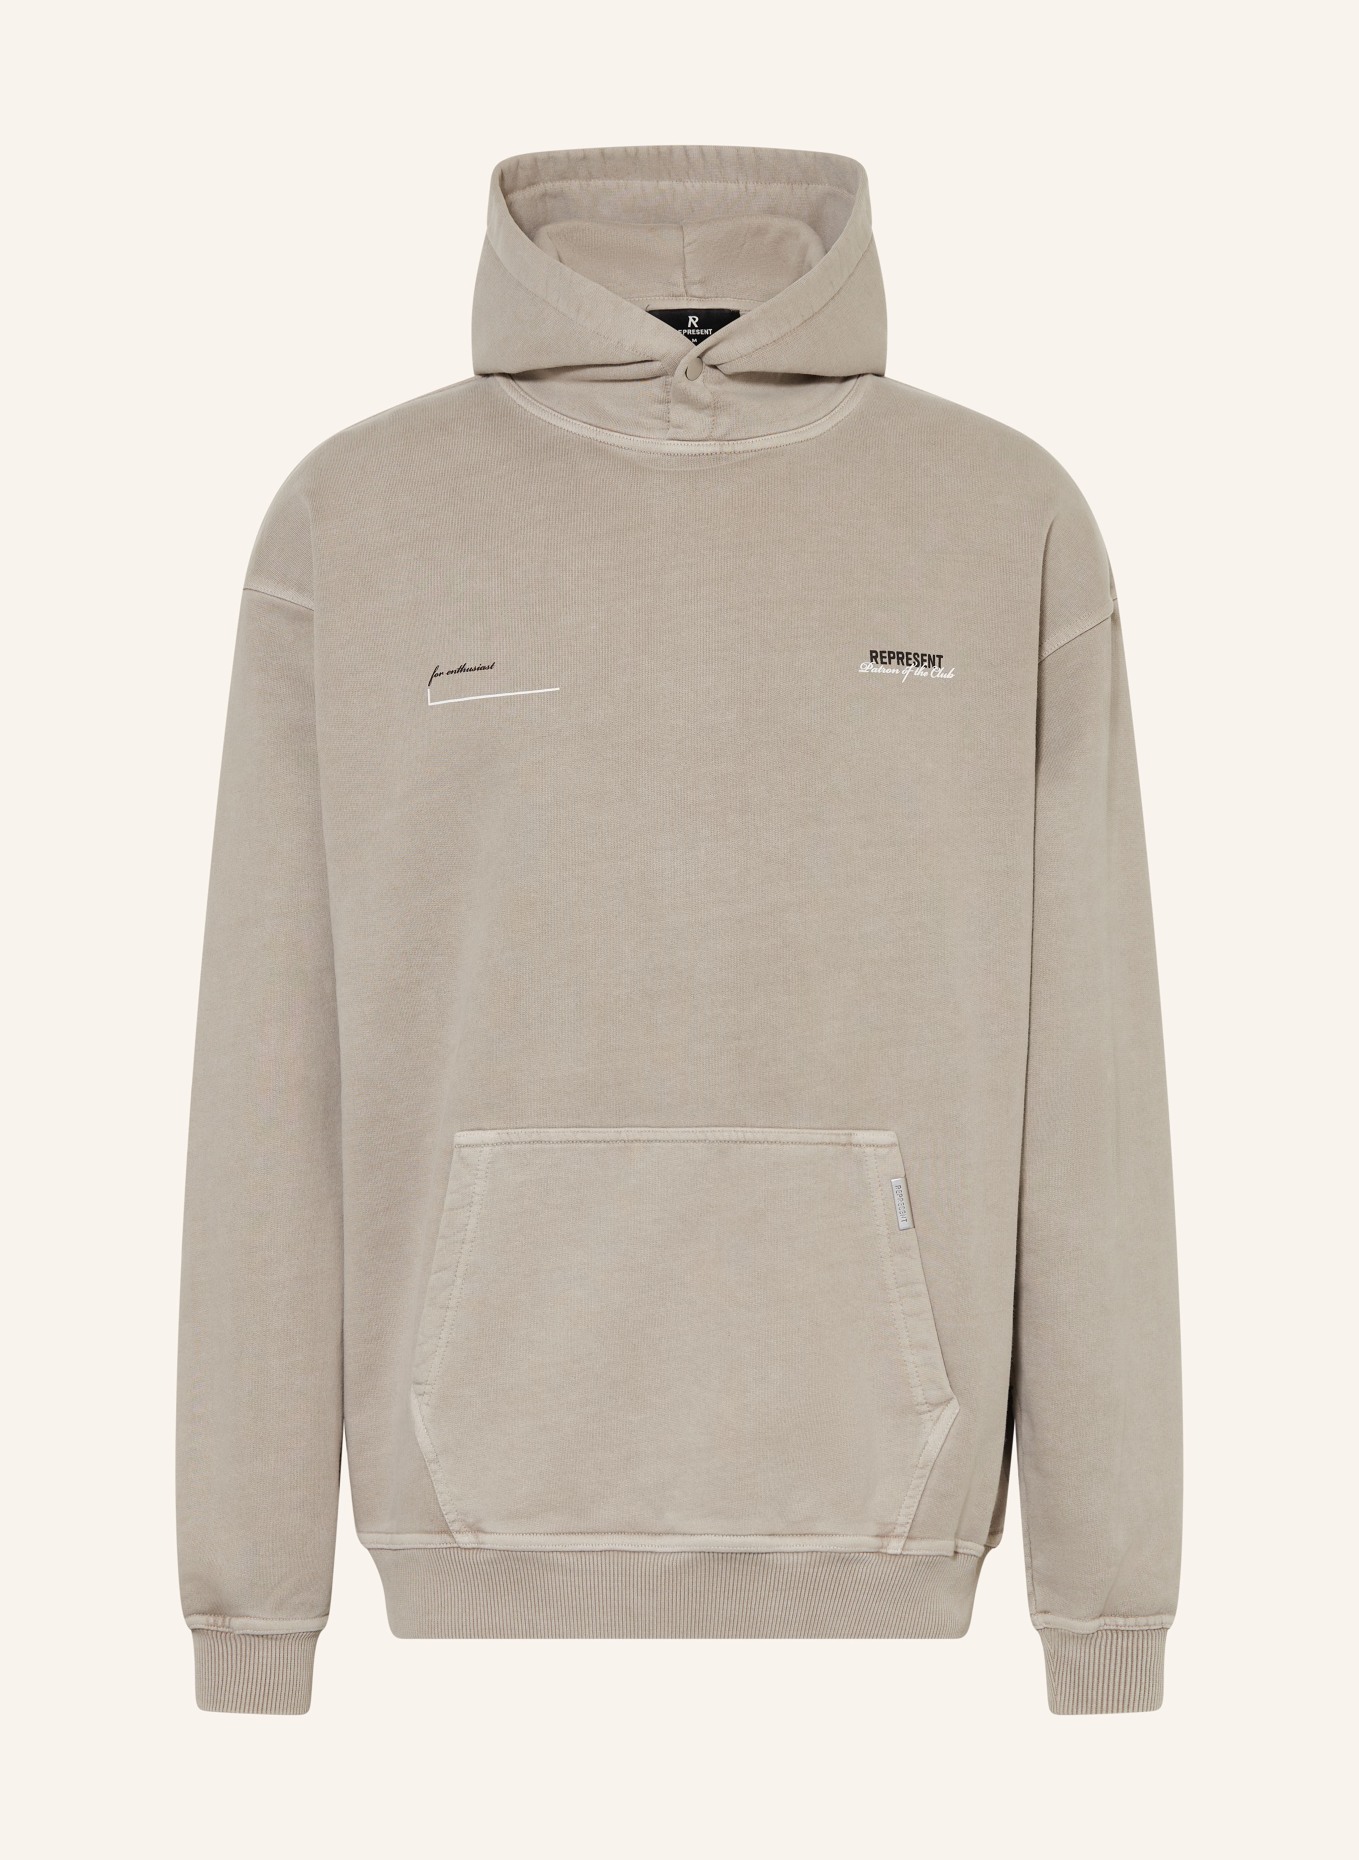 REPRESENT Hoodie PATRON OF THE CLUB, Farbe: TAUPE (Bild 1)